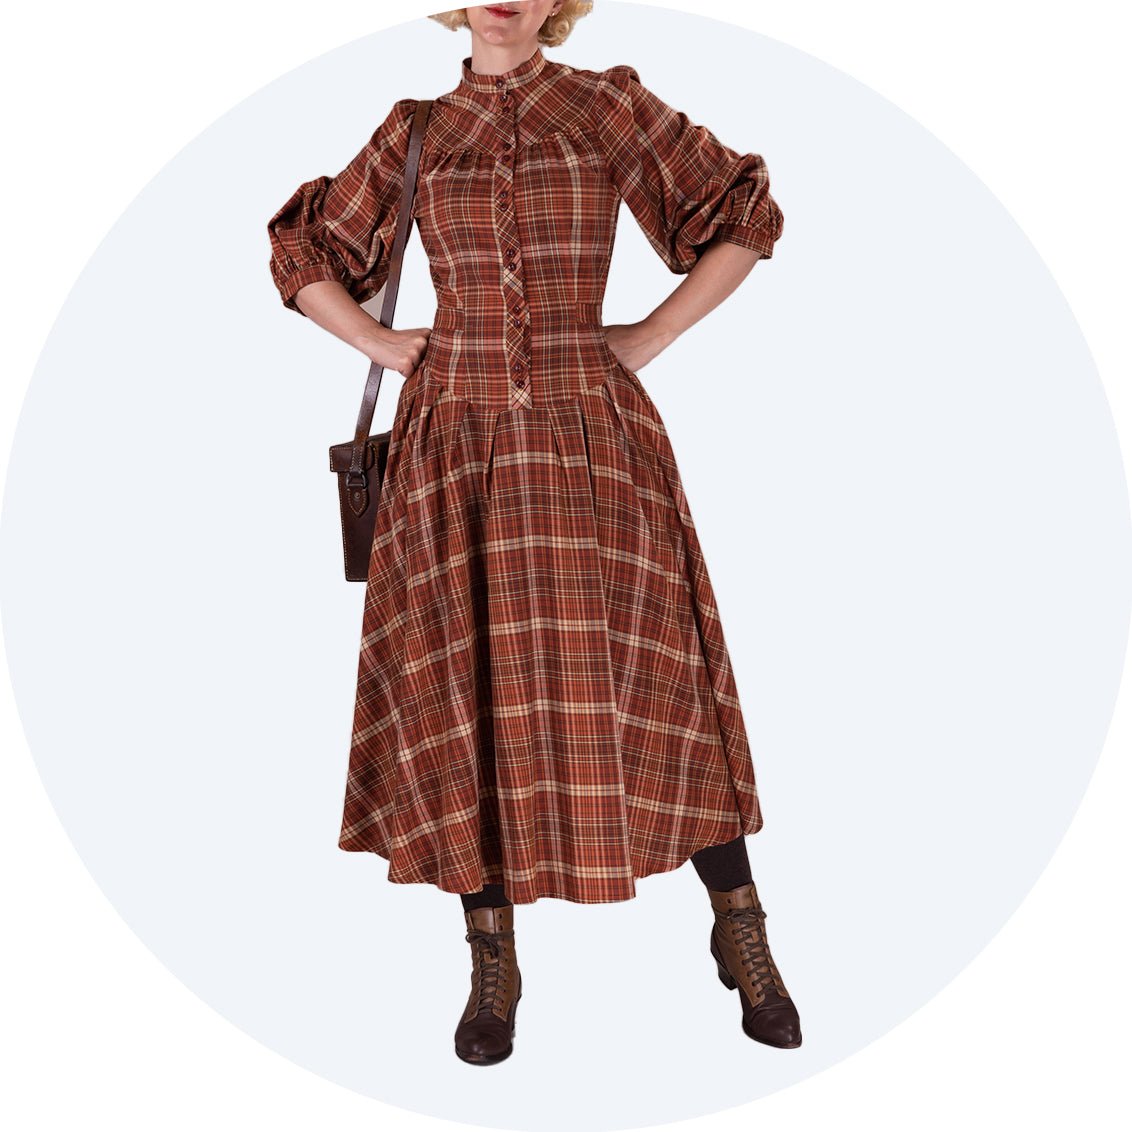 Vintage style dress with three quarter length sleeves, dropped waist and Grandpa collar in a rusty plaid- The Green Gables Dress by Emmy Design Sweden from Revival Retro London UK.